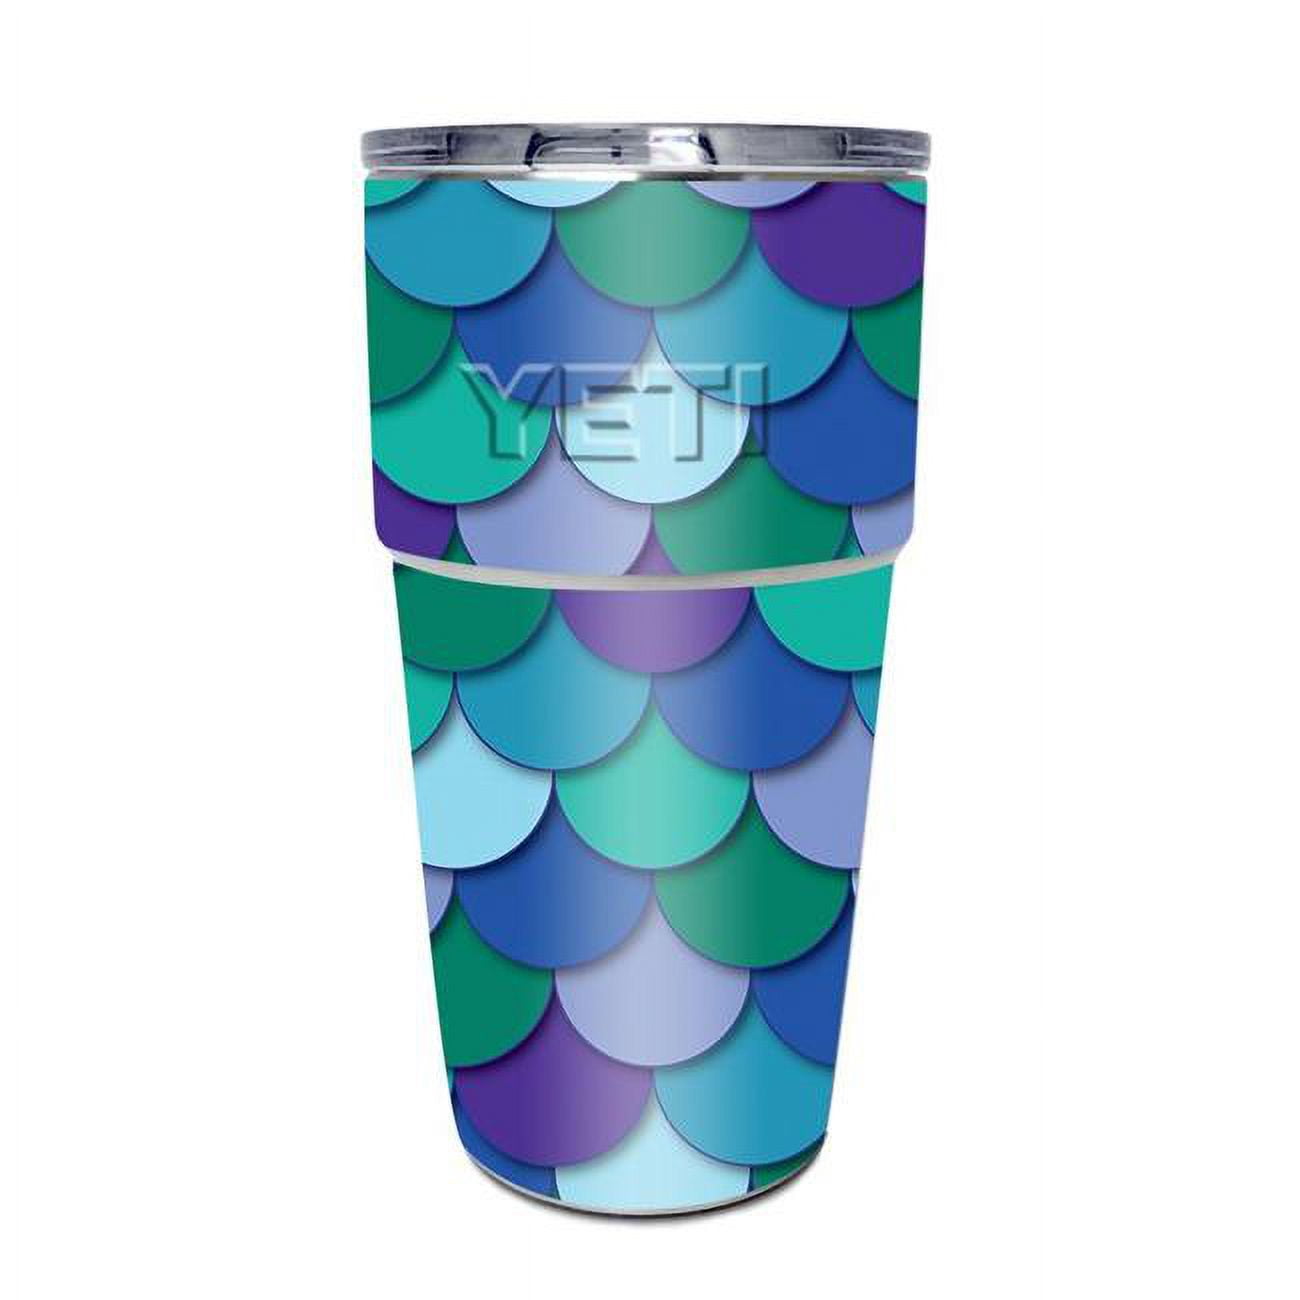 MightySkins YEPINT16SI-Watercolor Blue Skin for Yeti Rambler 16 oz  Stackable Cup - Watercolor Blue 